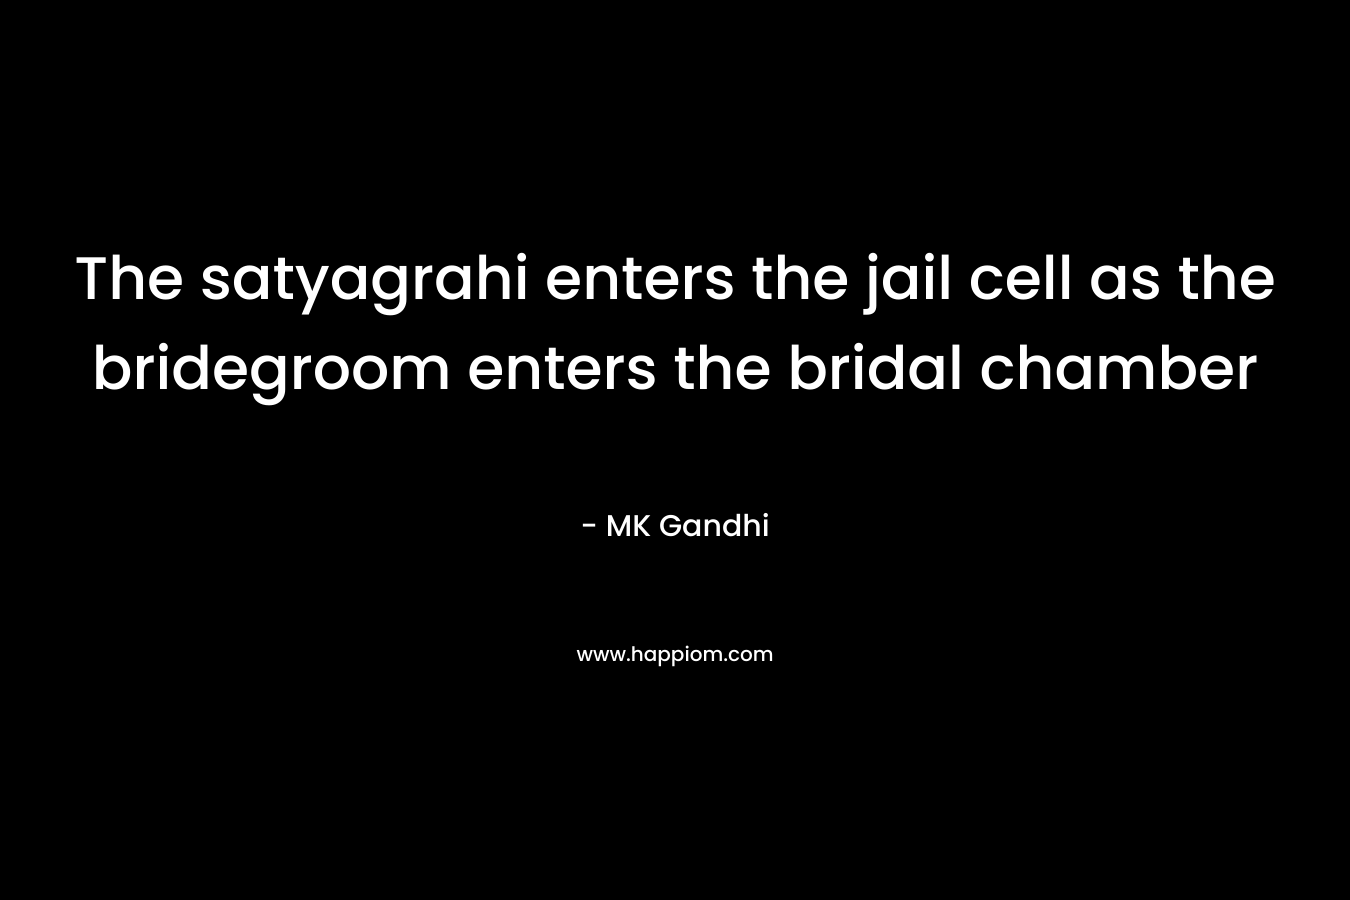 The satyagrahi enters the jail cell as the bridegroom enters the bridal chamber – MK Gandhi